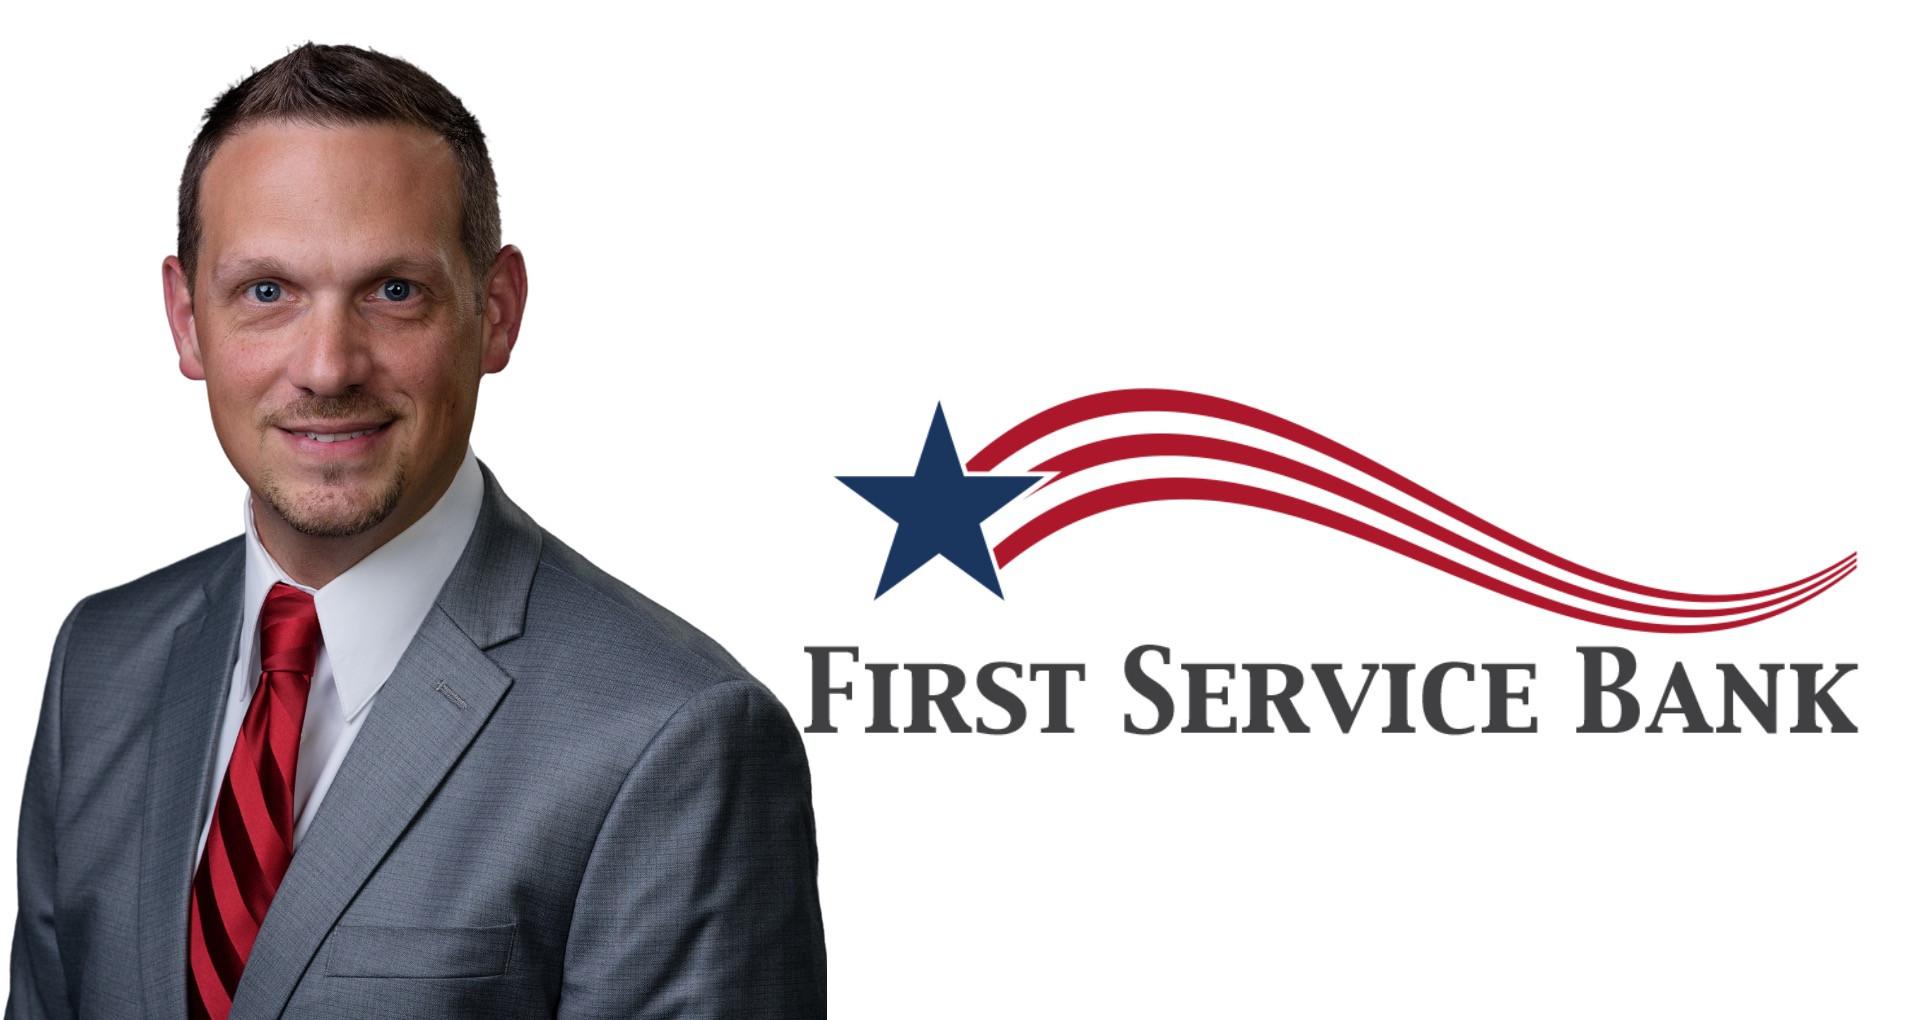 First Service Bank wants your business!